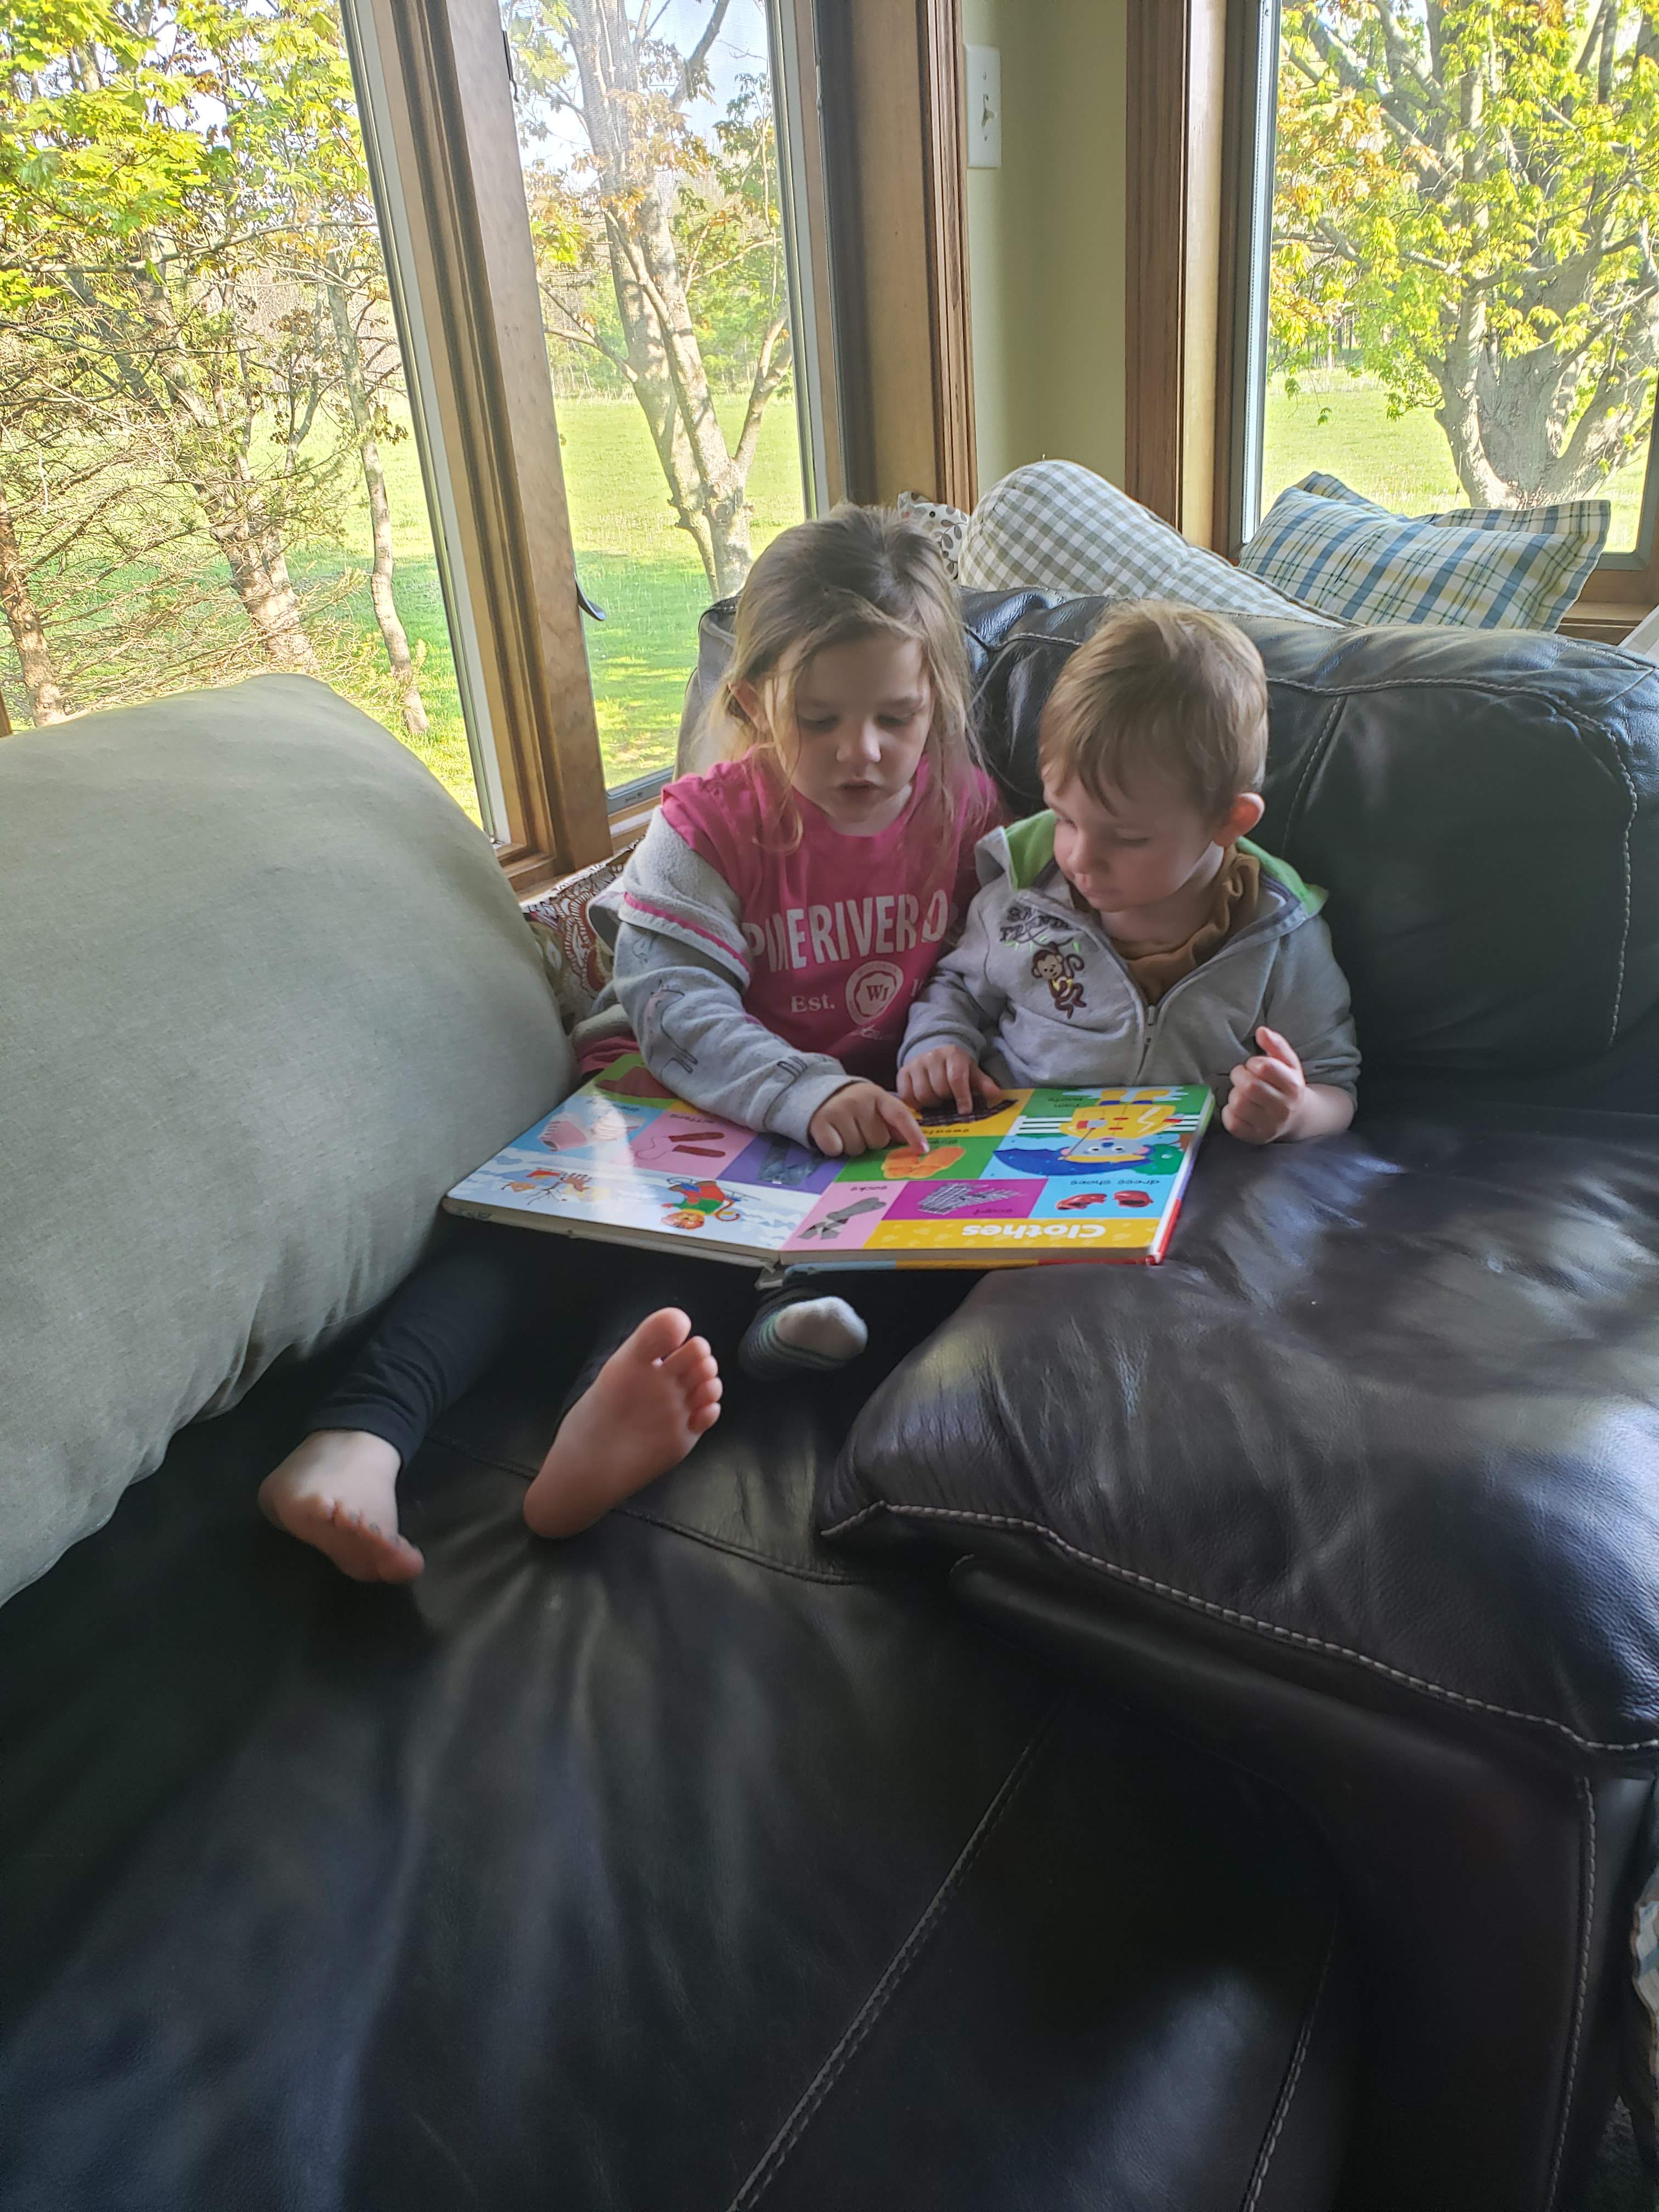 Child reading to younger child on sofa